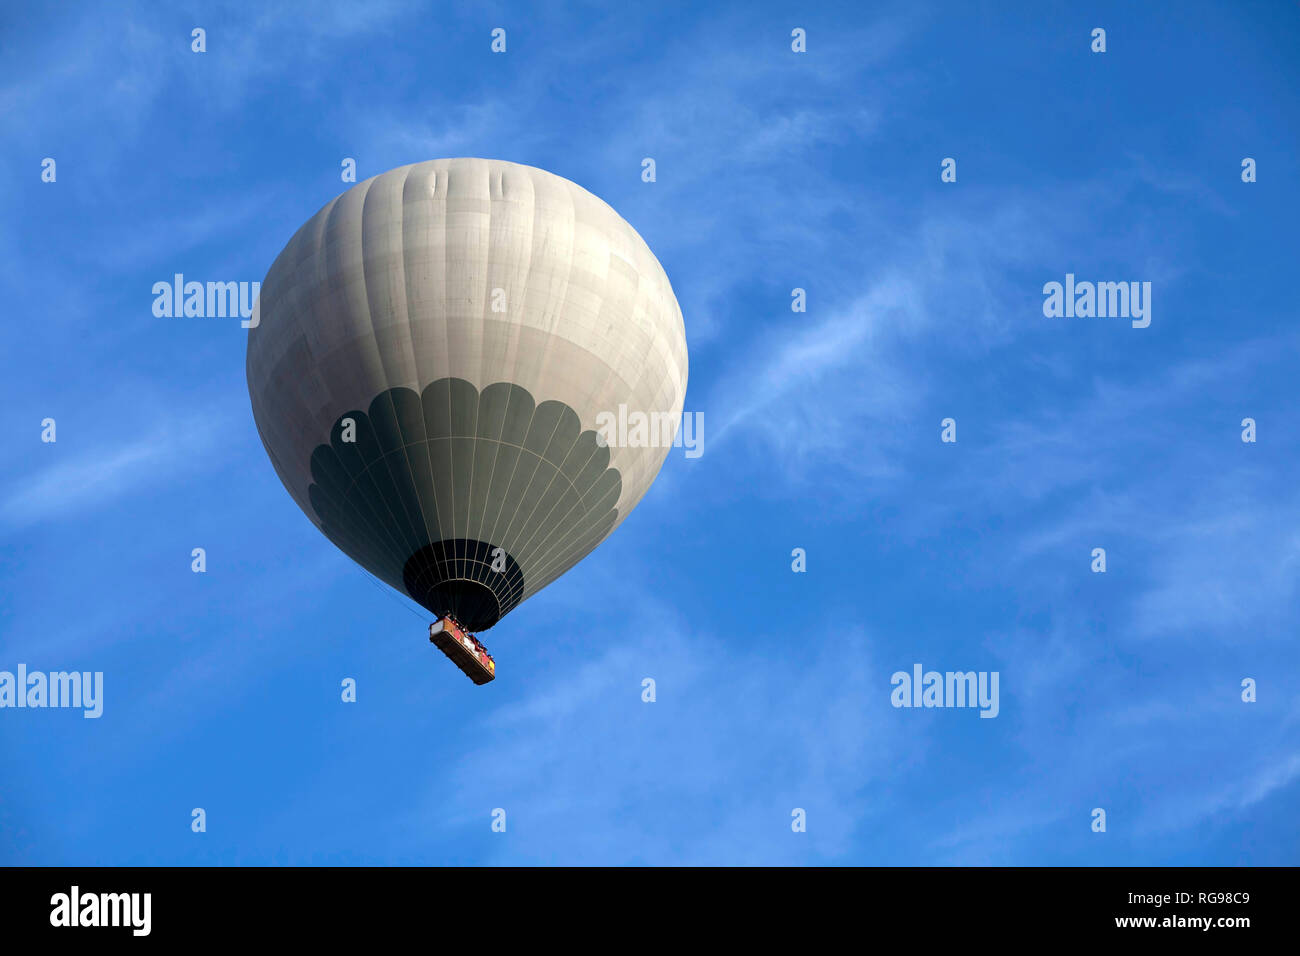 Low angle view of a hot air balloon, Cappadoce, Turquie Banque D'Images